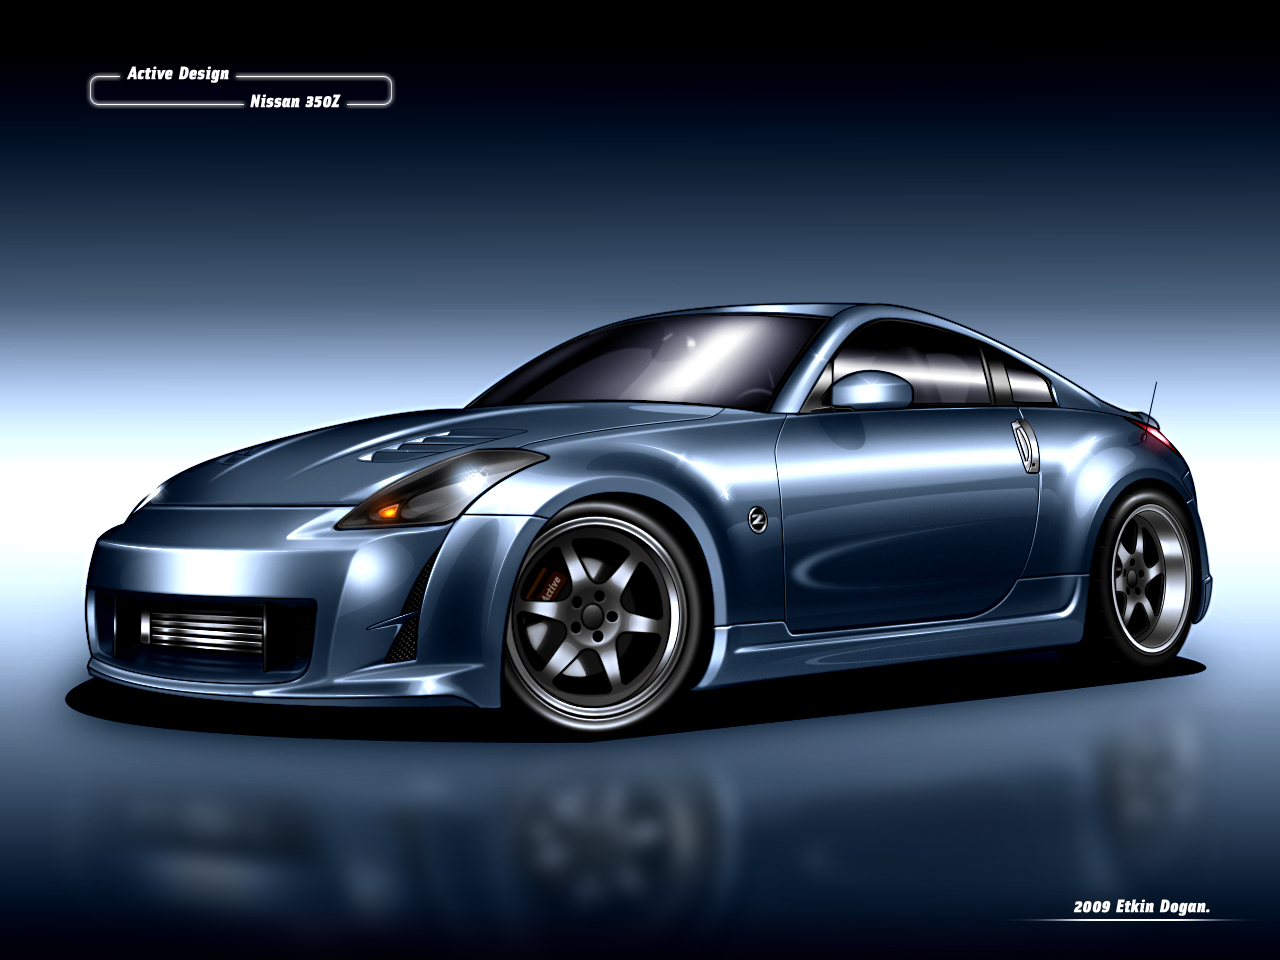 Background Of The Day Nissan 350z Wallpaper